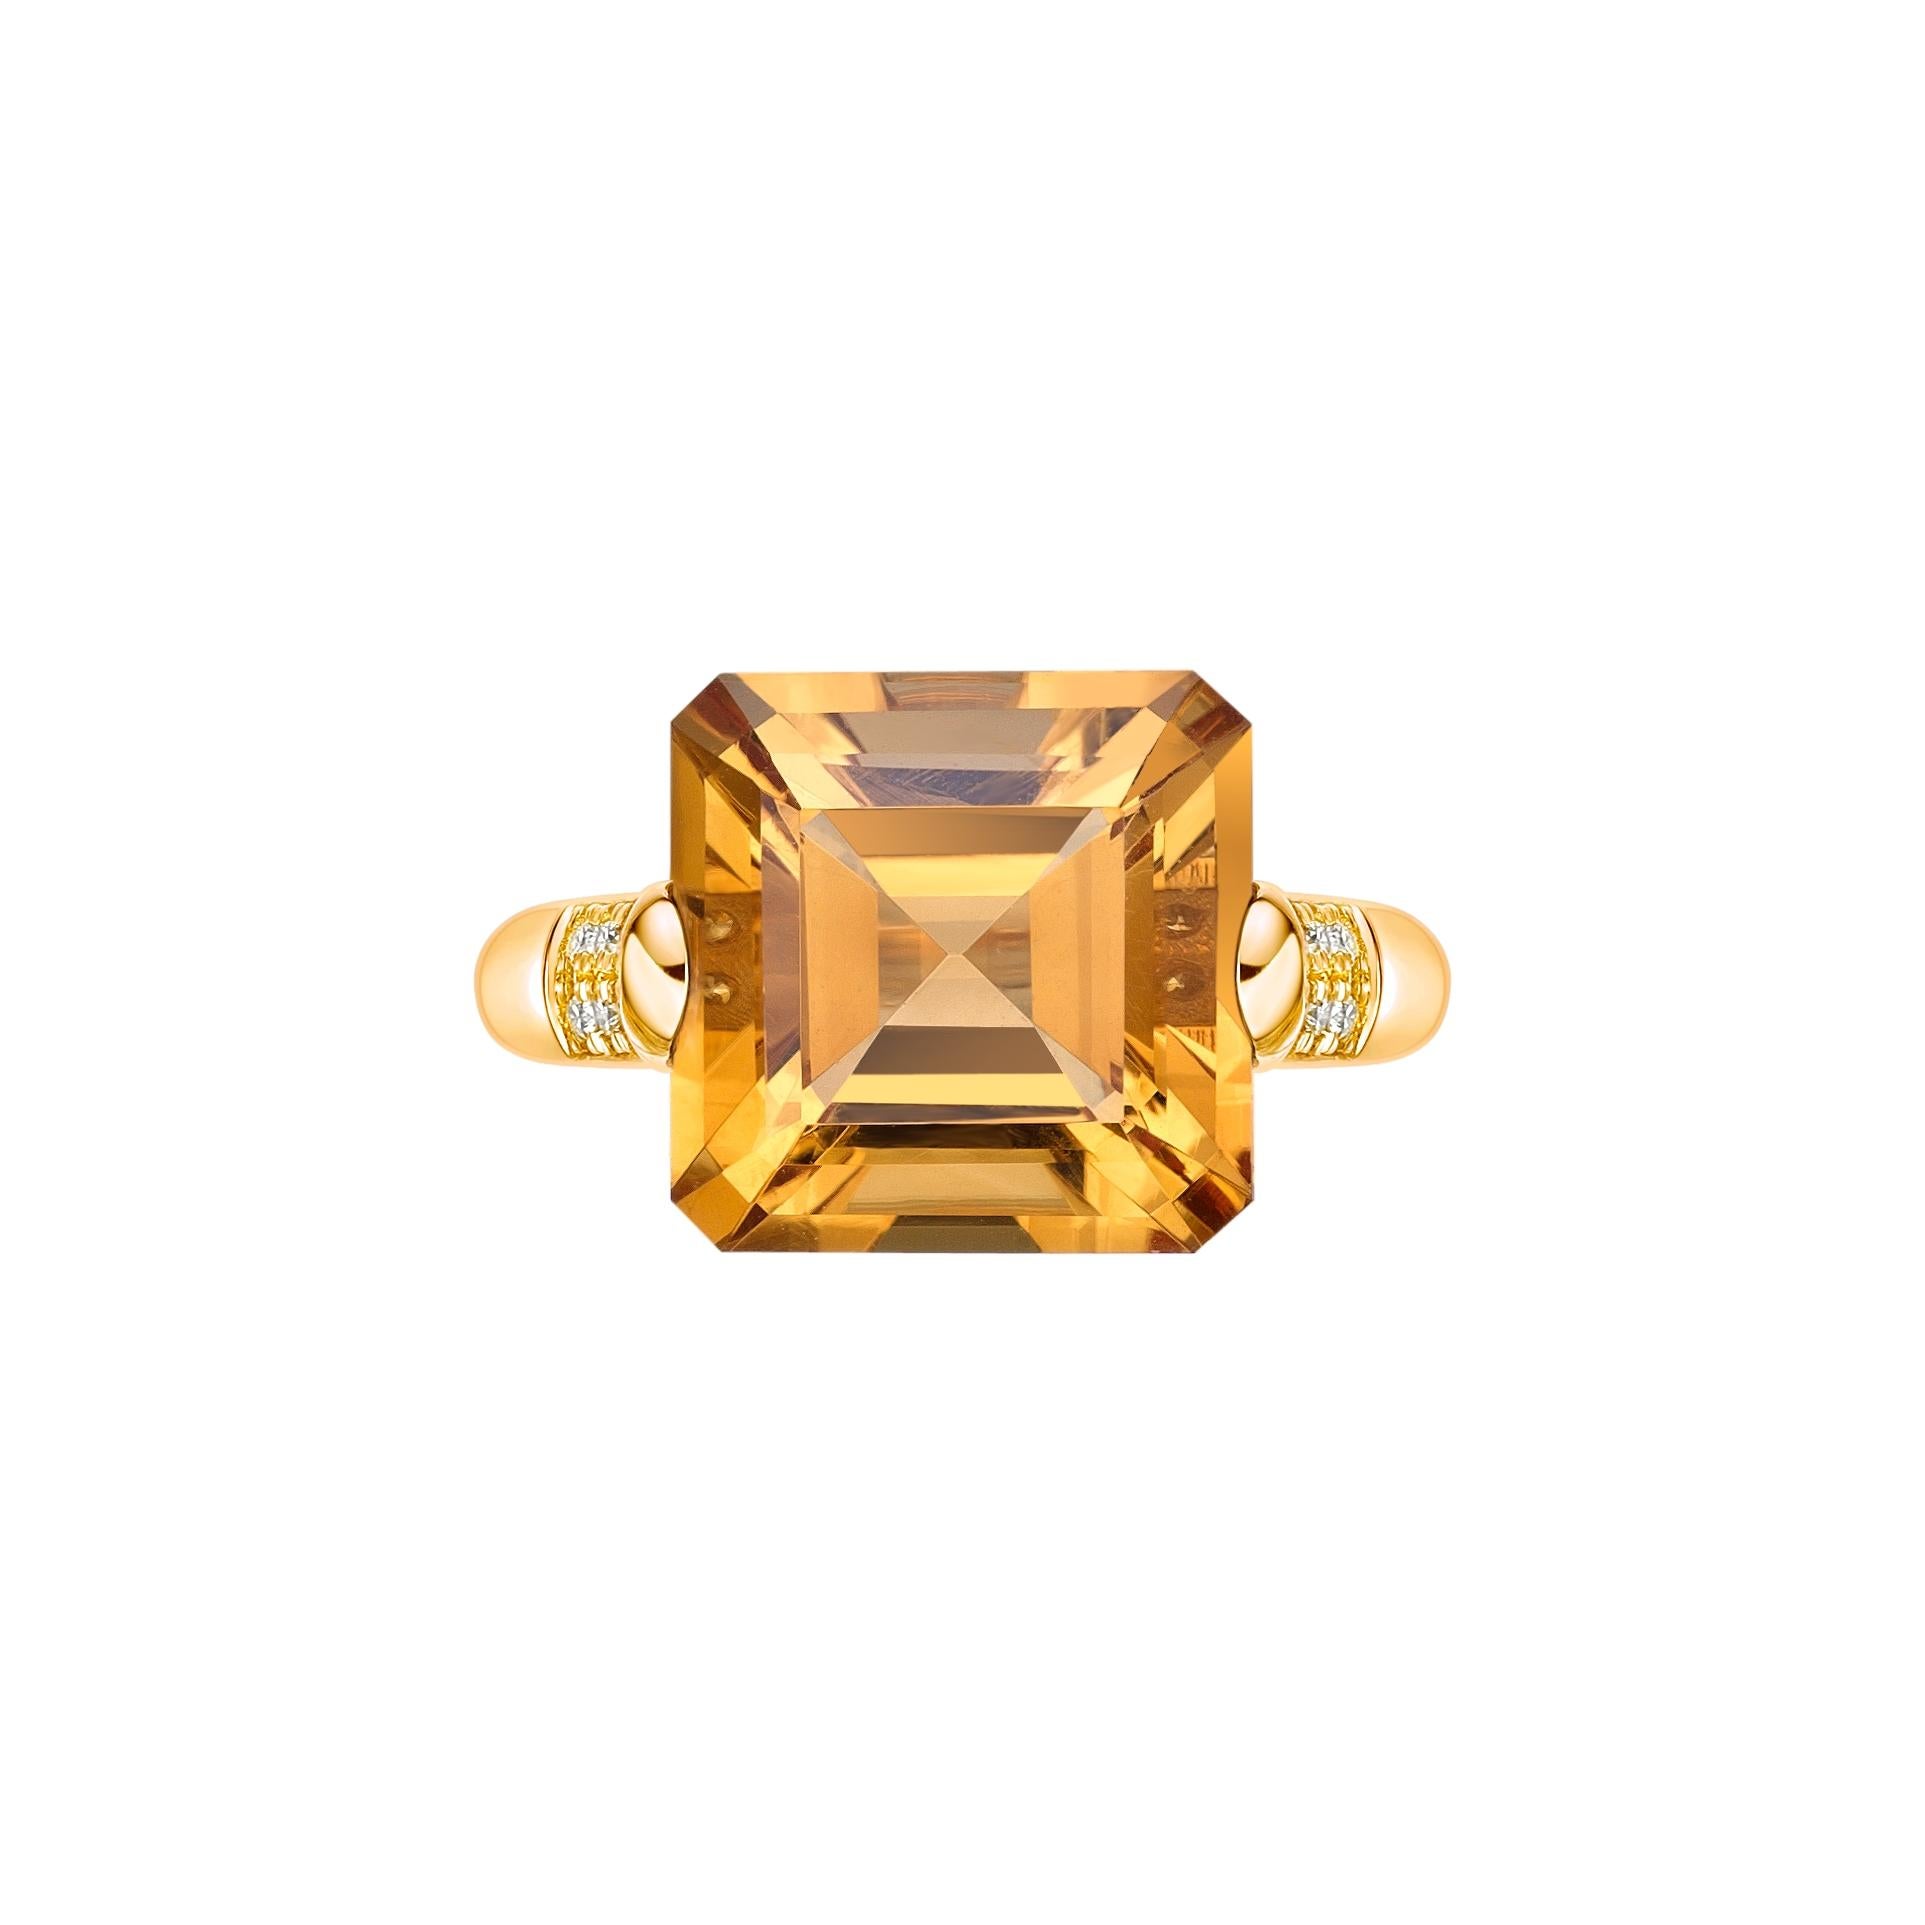 Contemporary 7.79Carat Citrine Fancy Ring in 18Karat Yellow Gold with White Diamond. For Sale